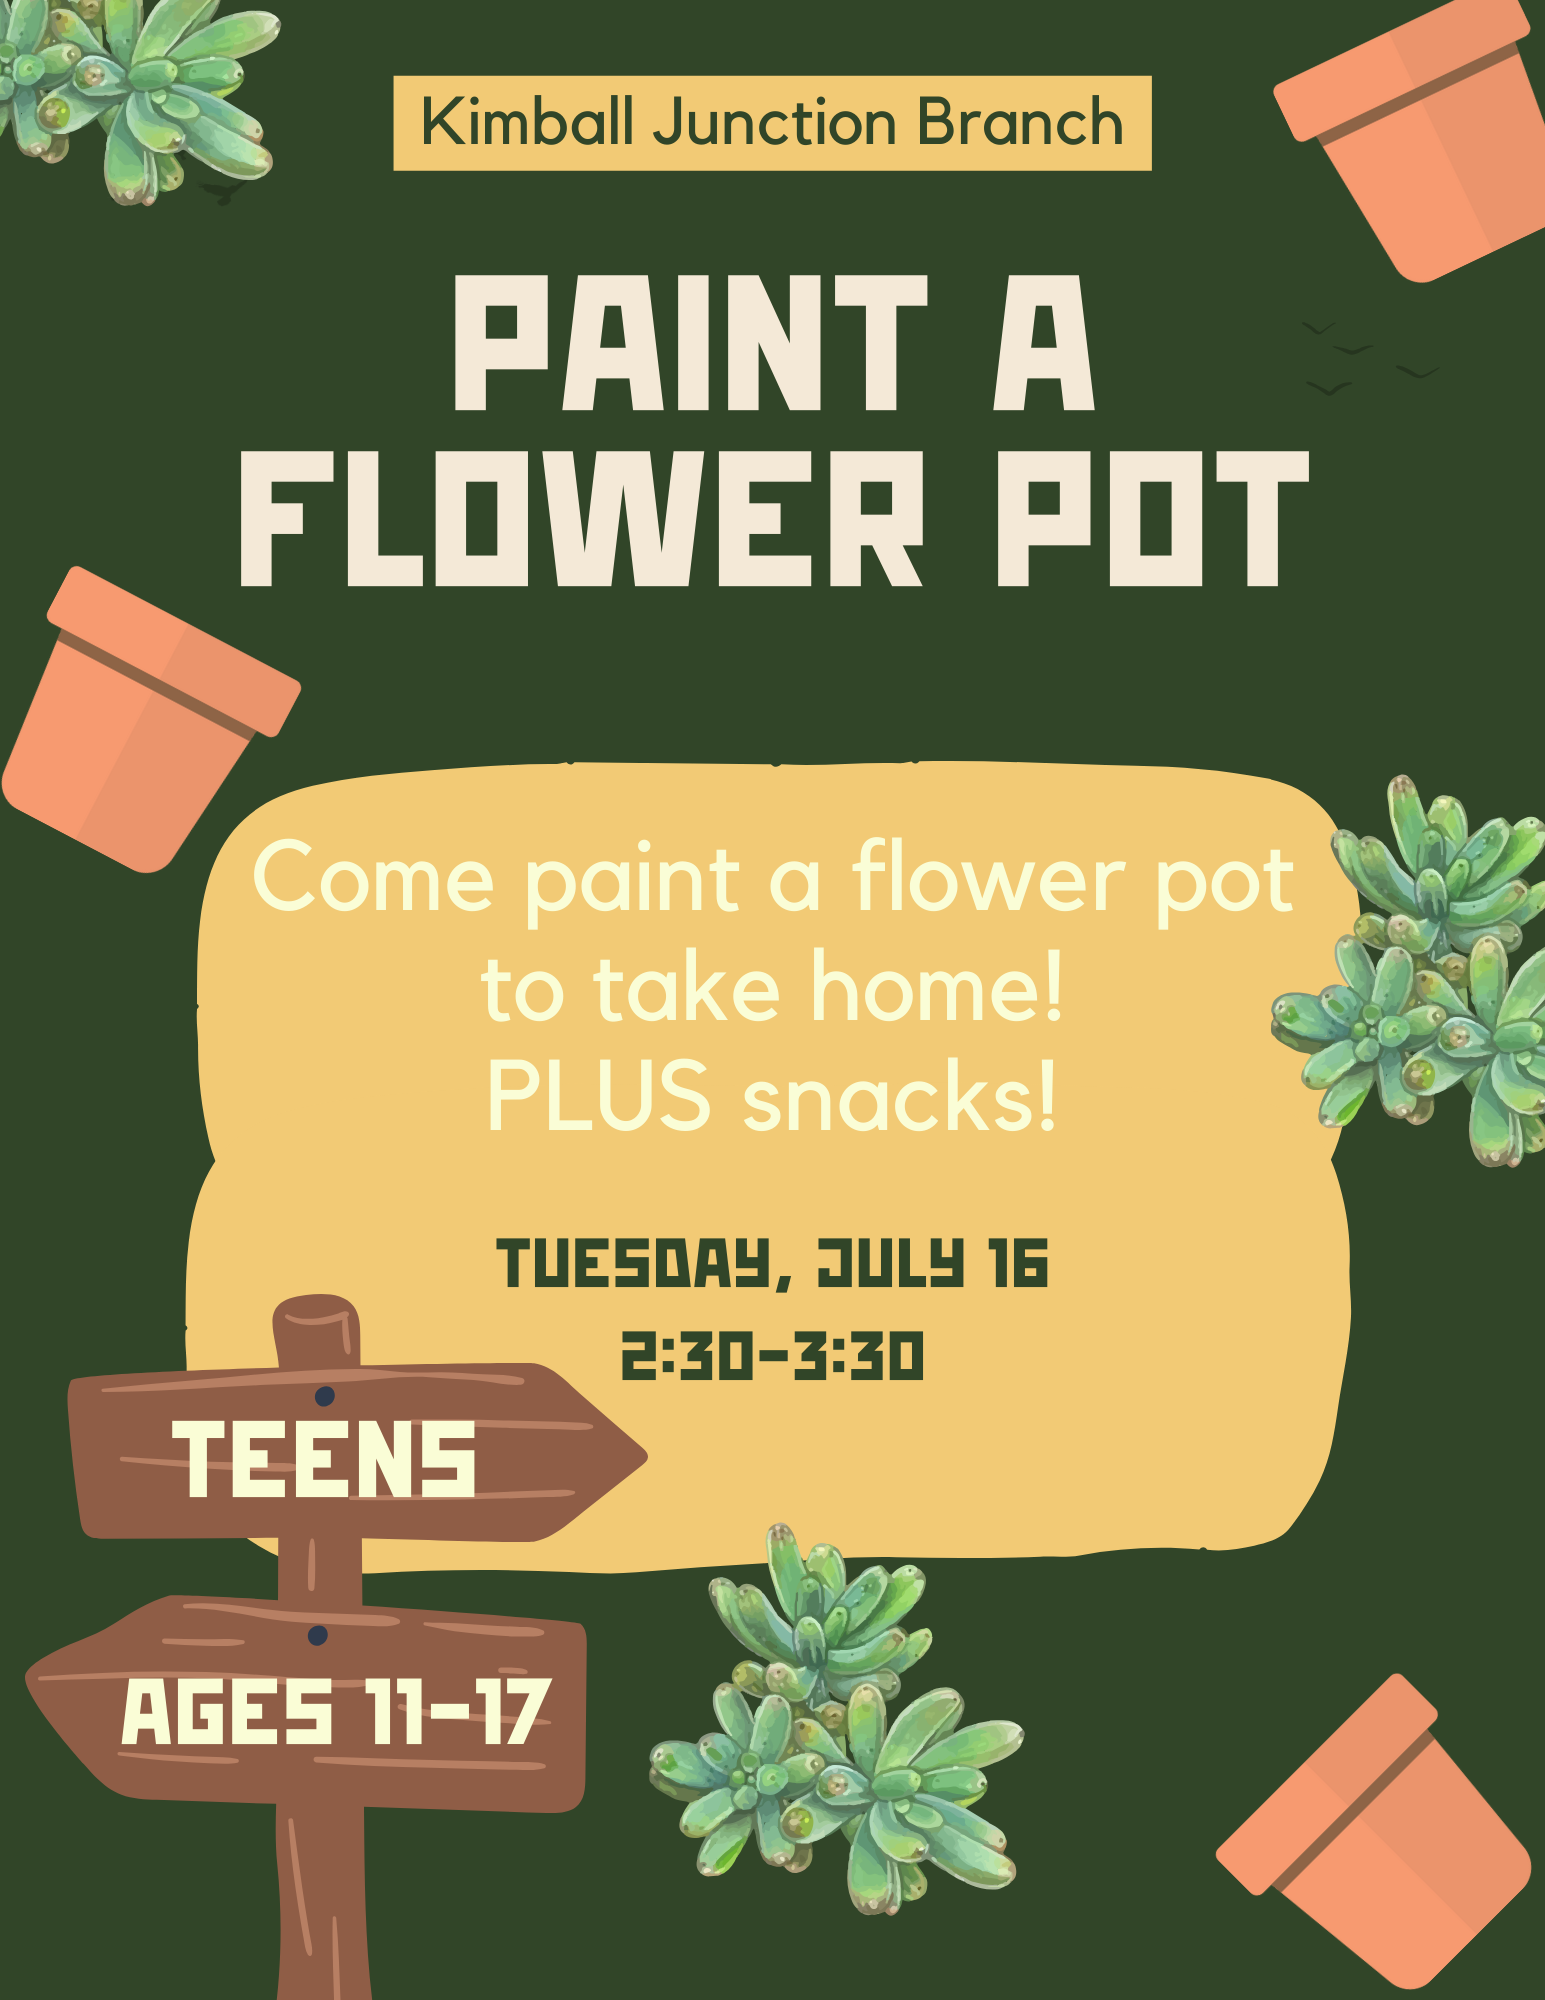 Teen Flower Pot Painting at Kimball Junction!